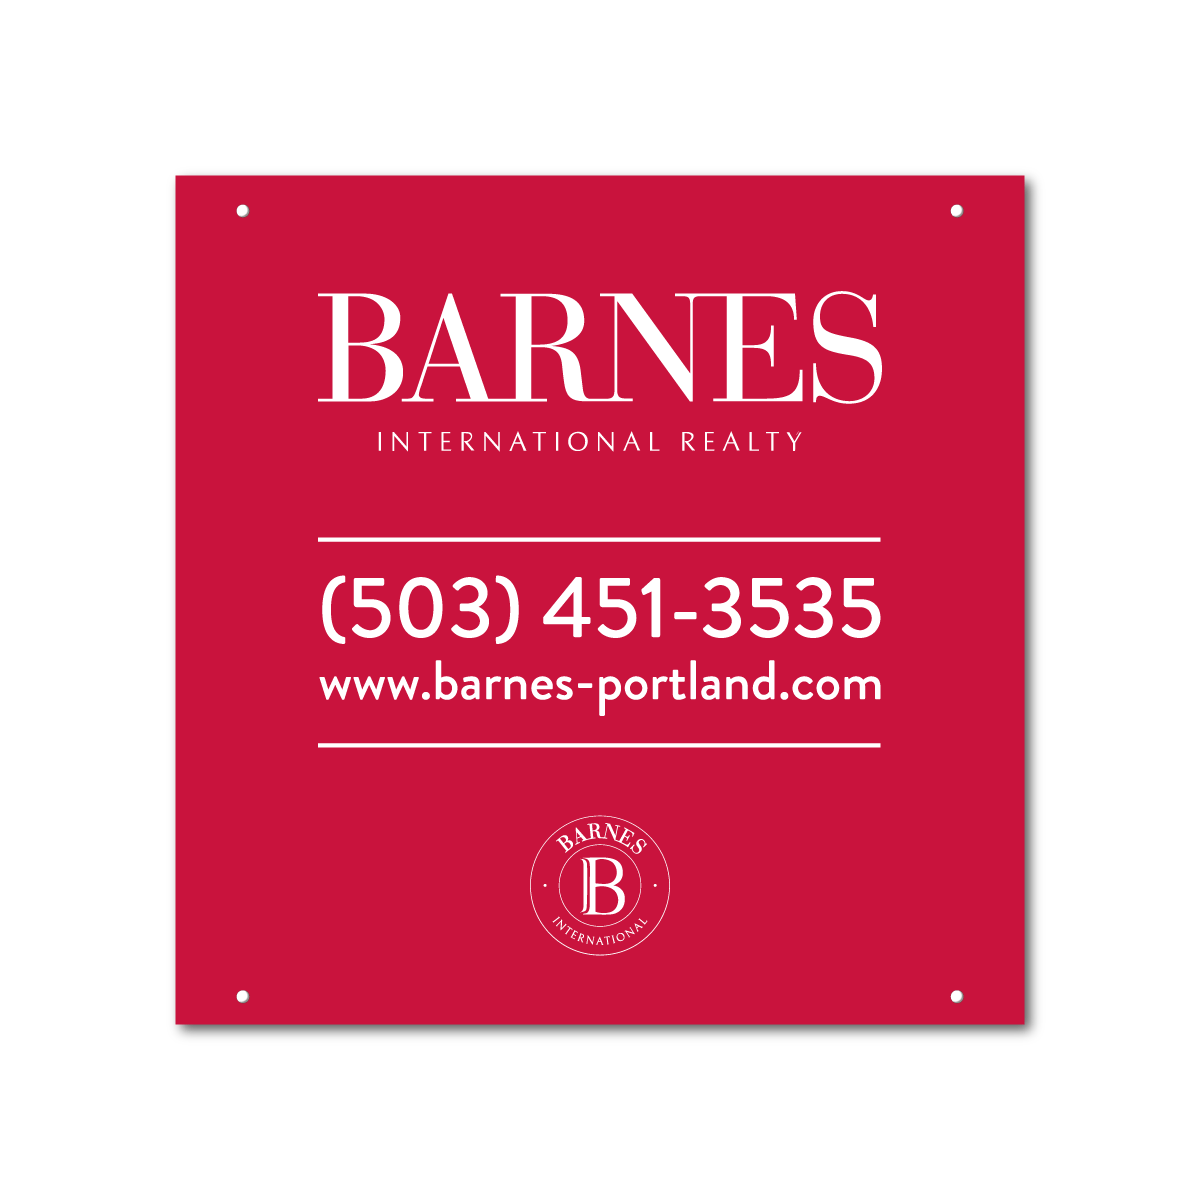 Barnes Real Estate - 24" x 24" Sign - All Things Real Estate